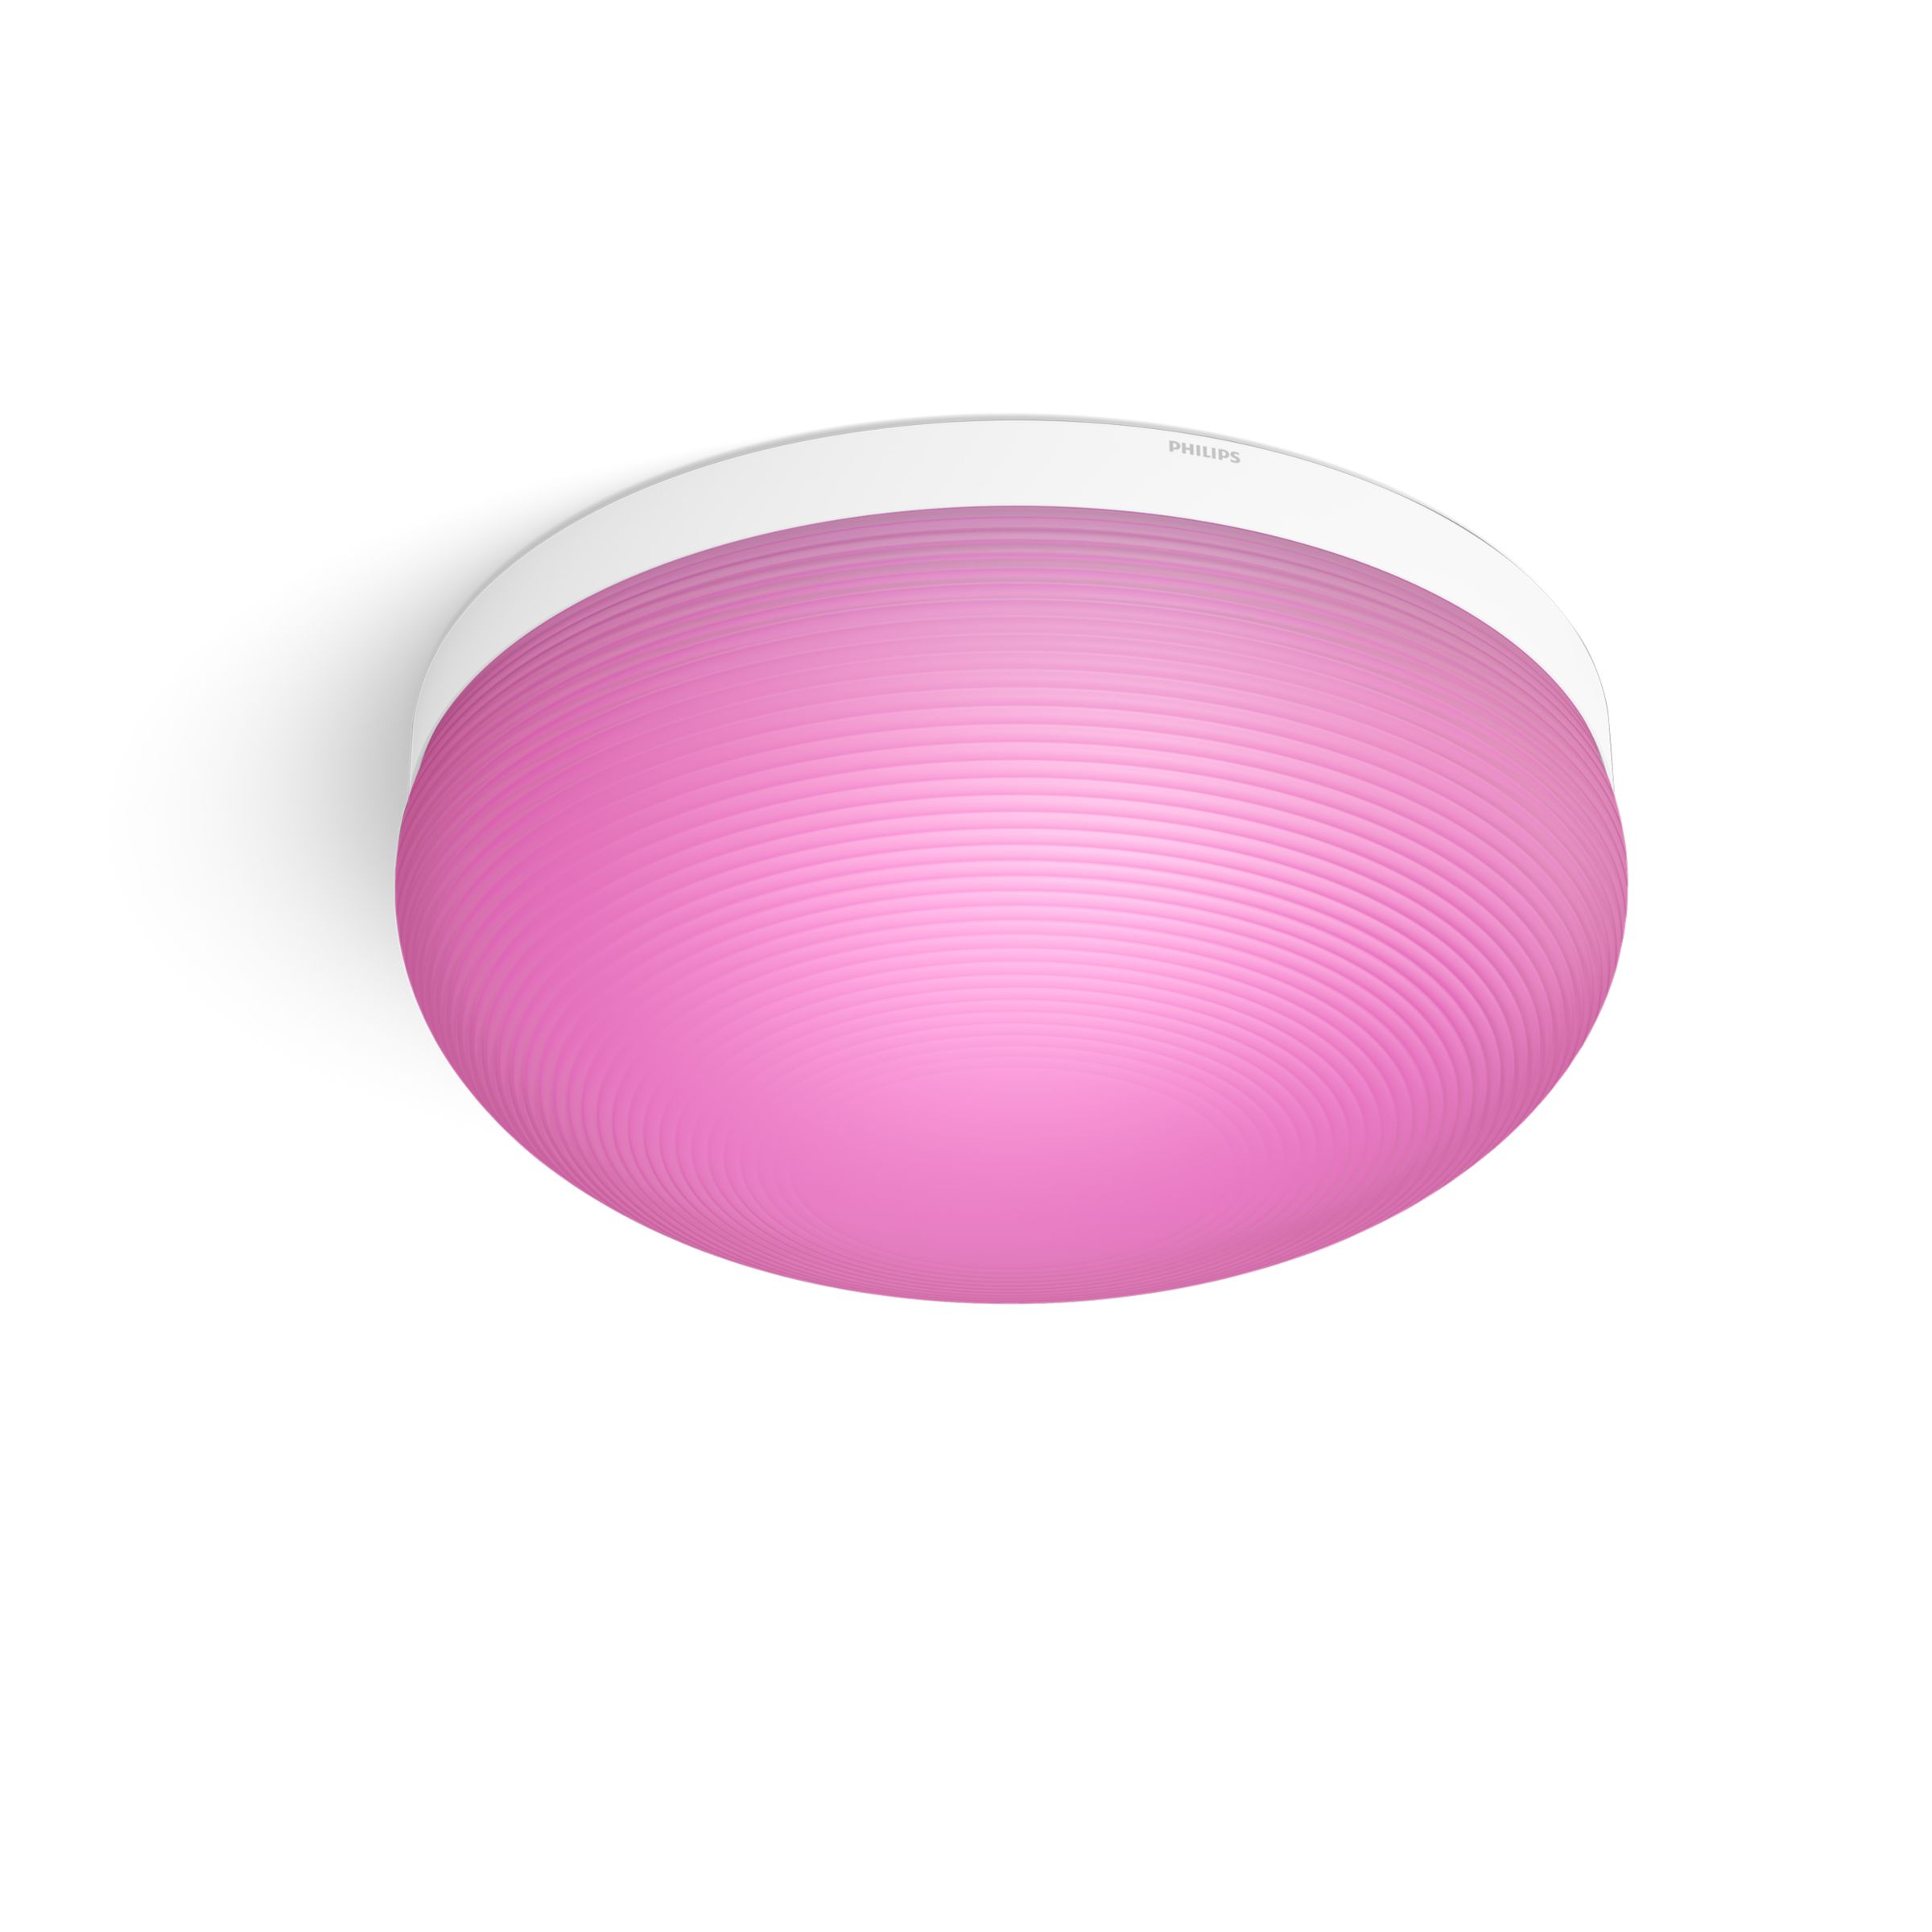 Verdachte Voeding Schilderen Hue White and color ambiance Flourish ceiling light | Philips Hue US